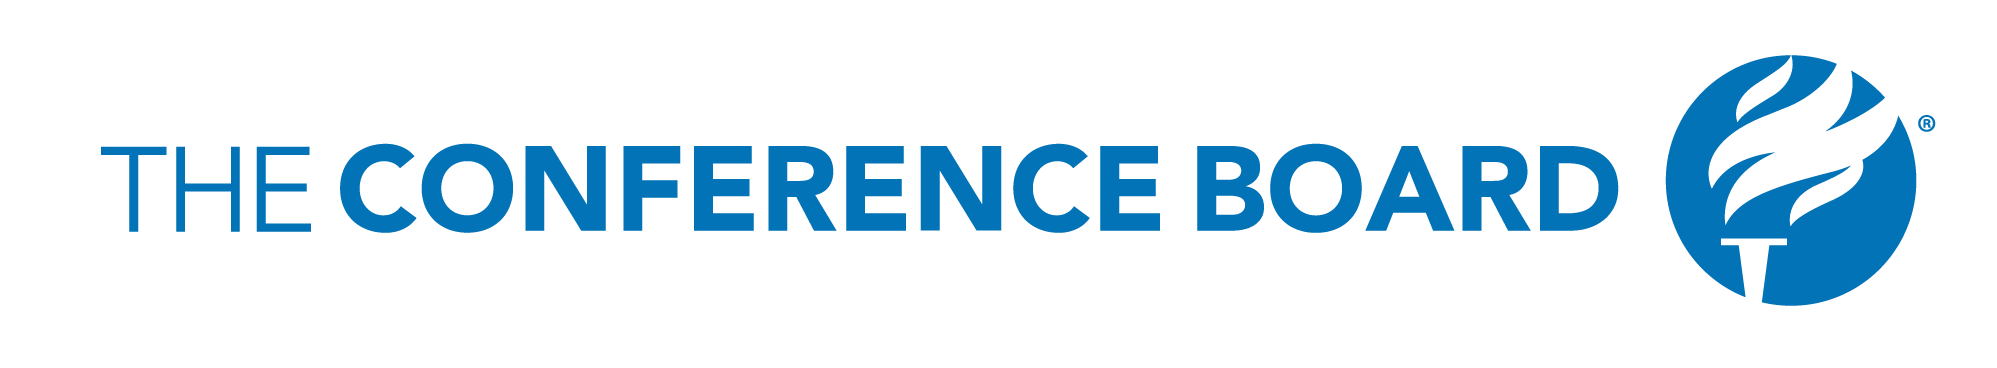 The Conference Board InSites logo